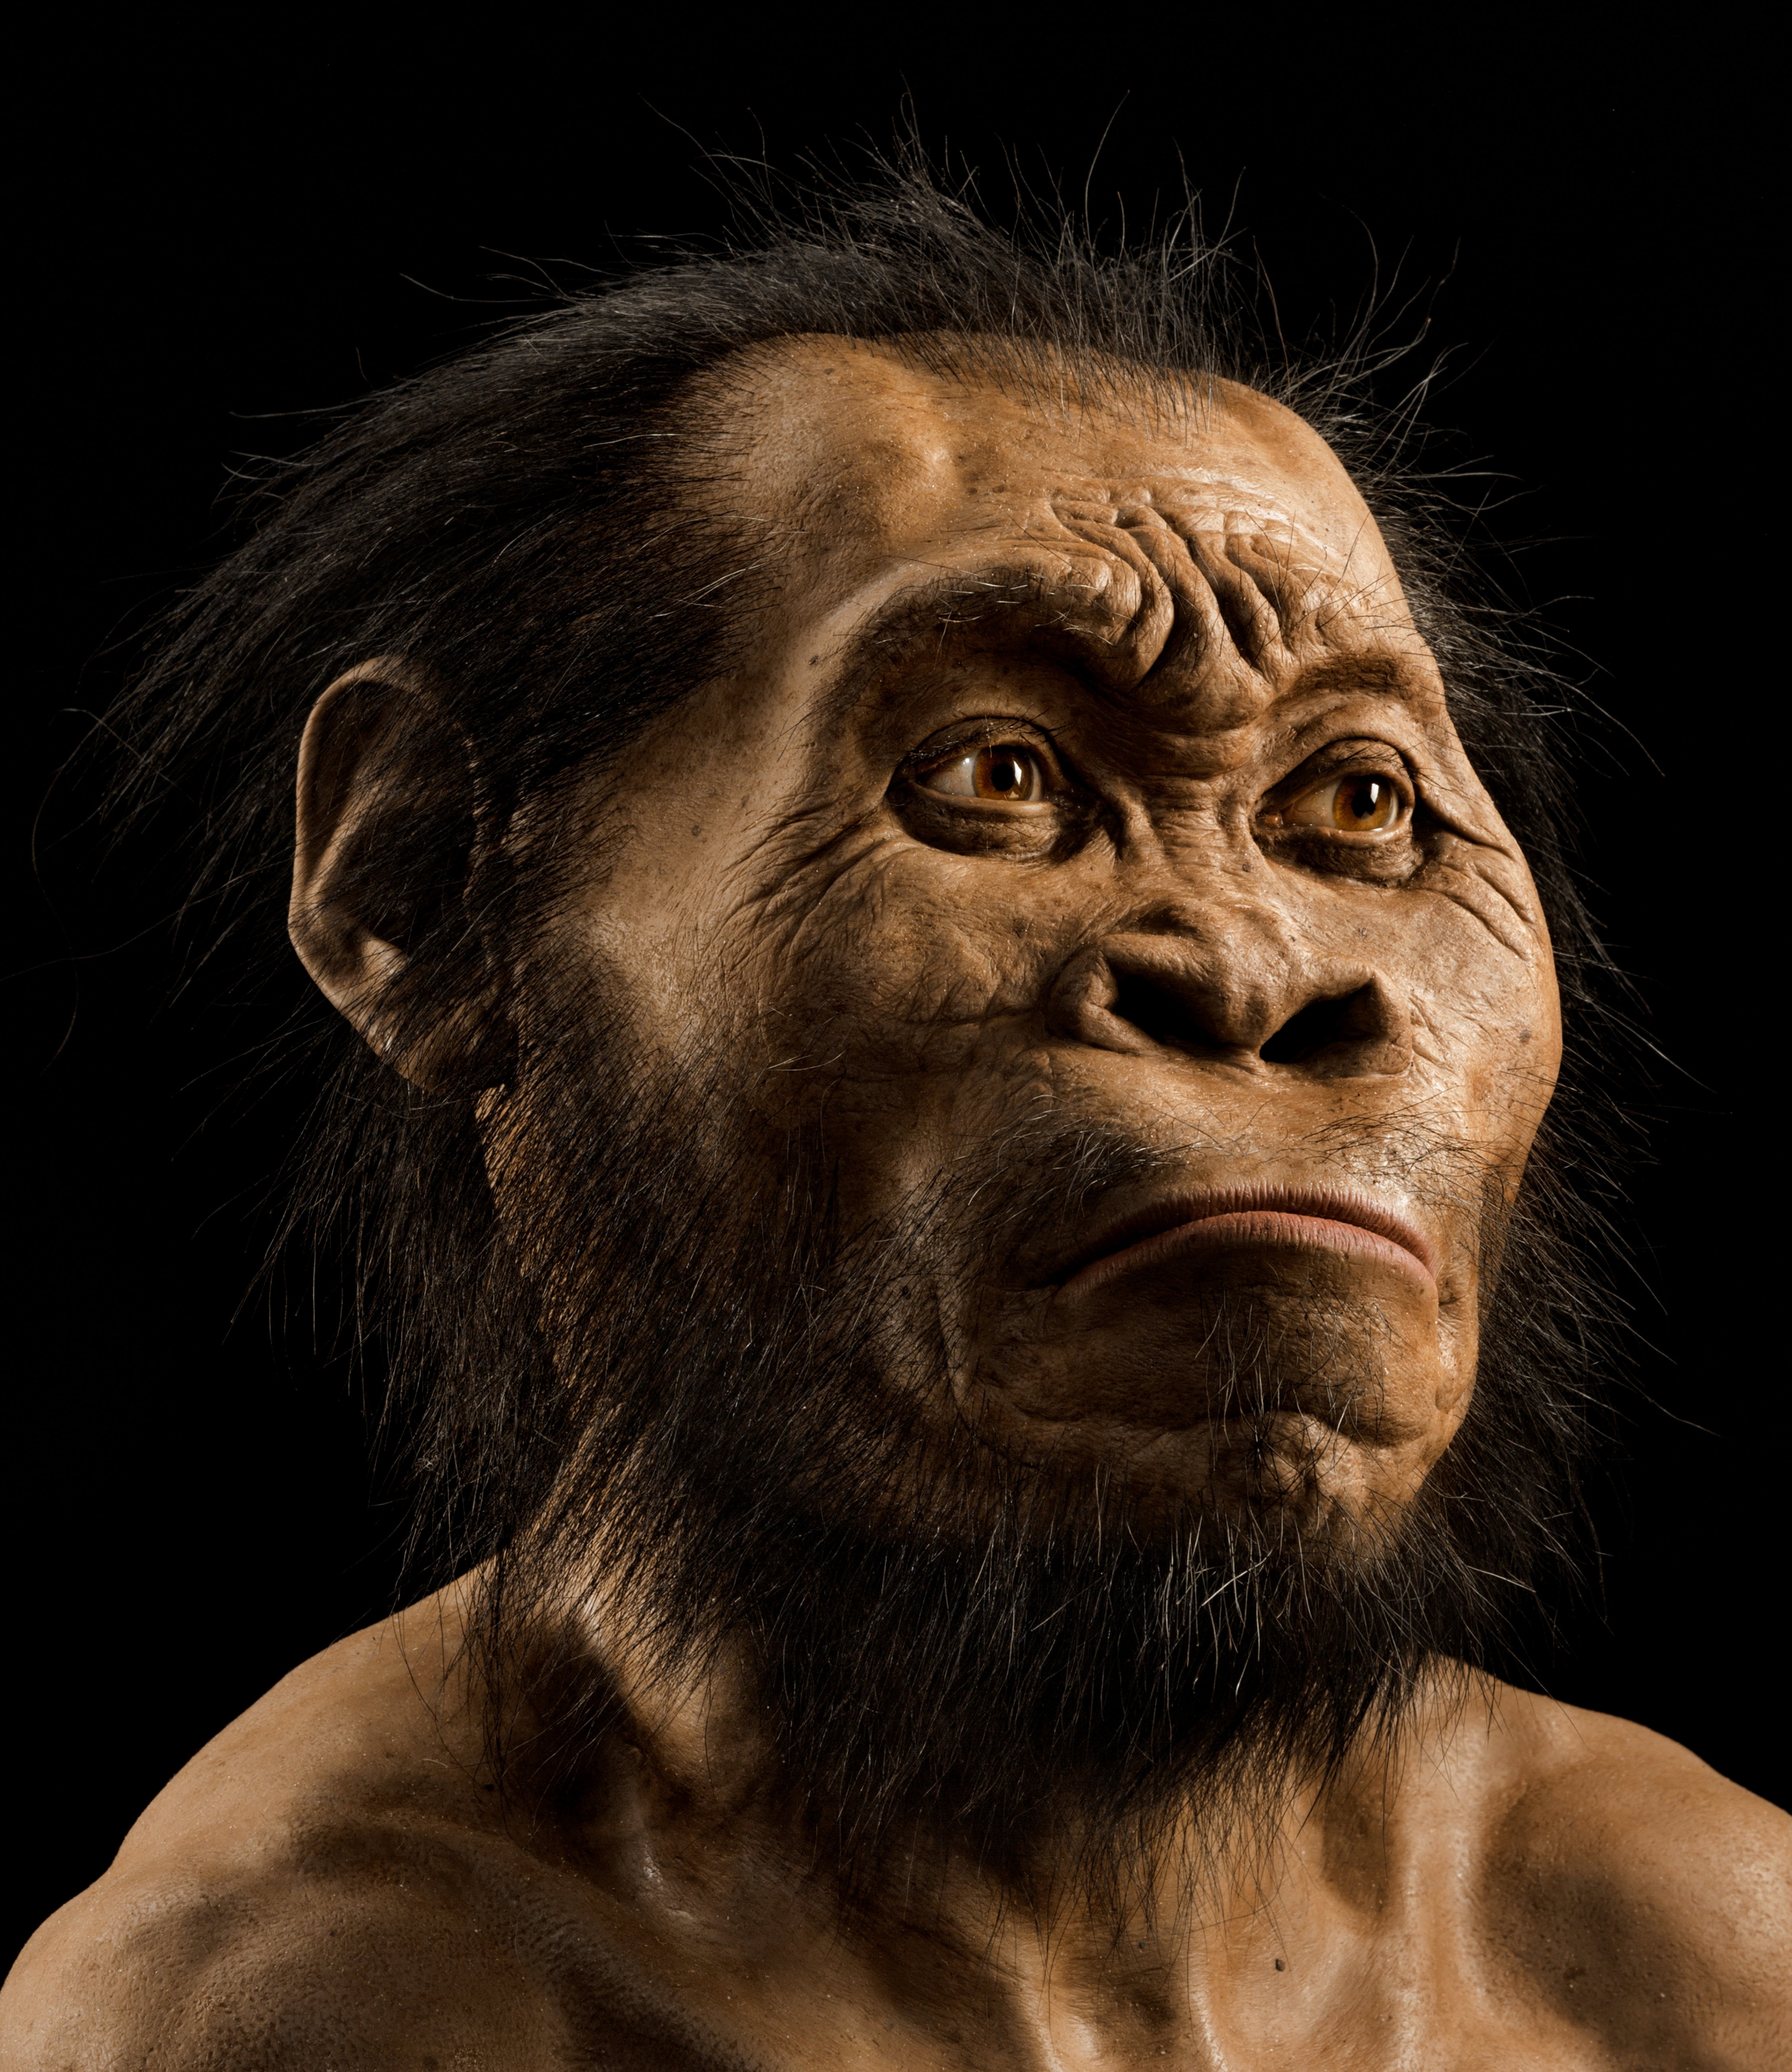 A reconstruction of Homo naledi’s head by paleoartist John Gurche, who spent some 700 hours recreating the head from bone scans